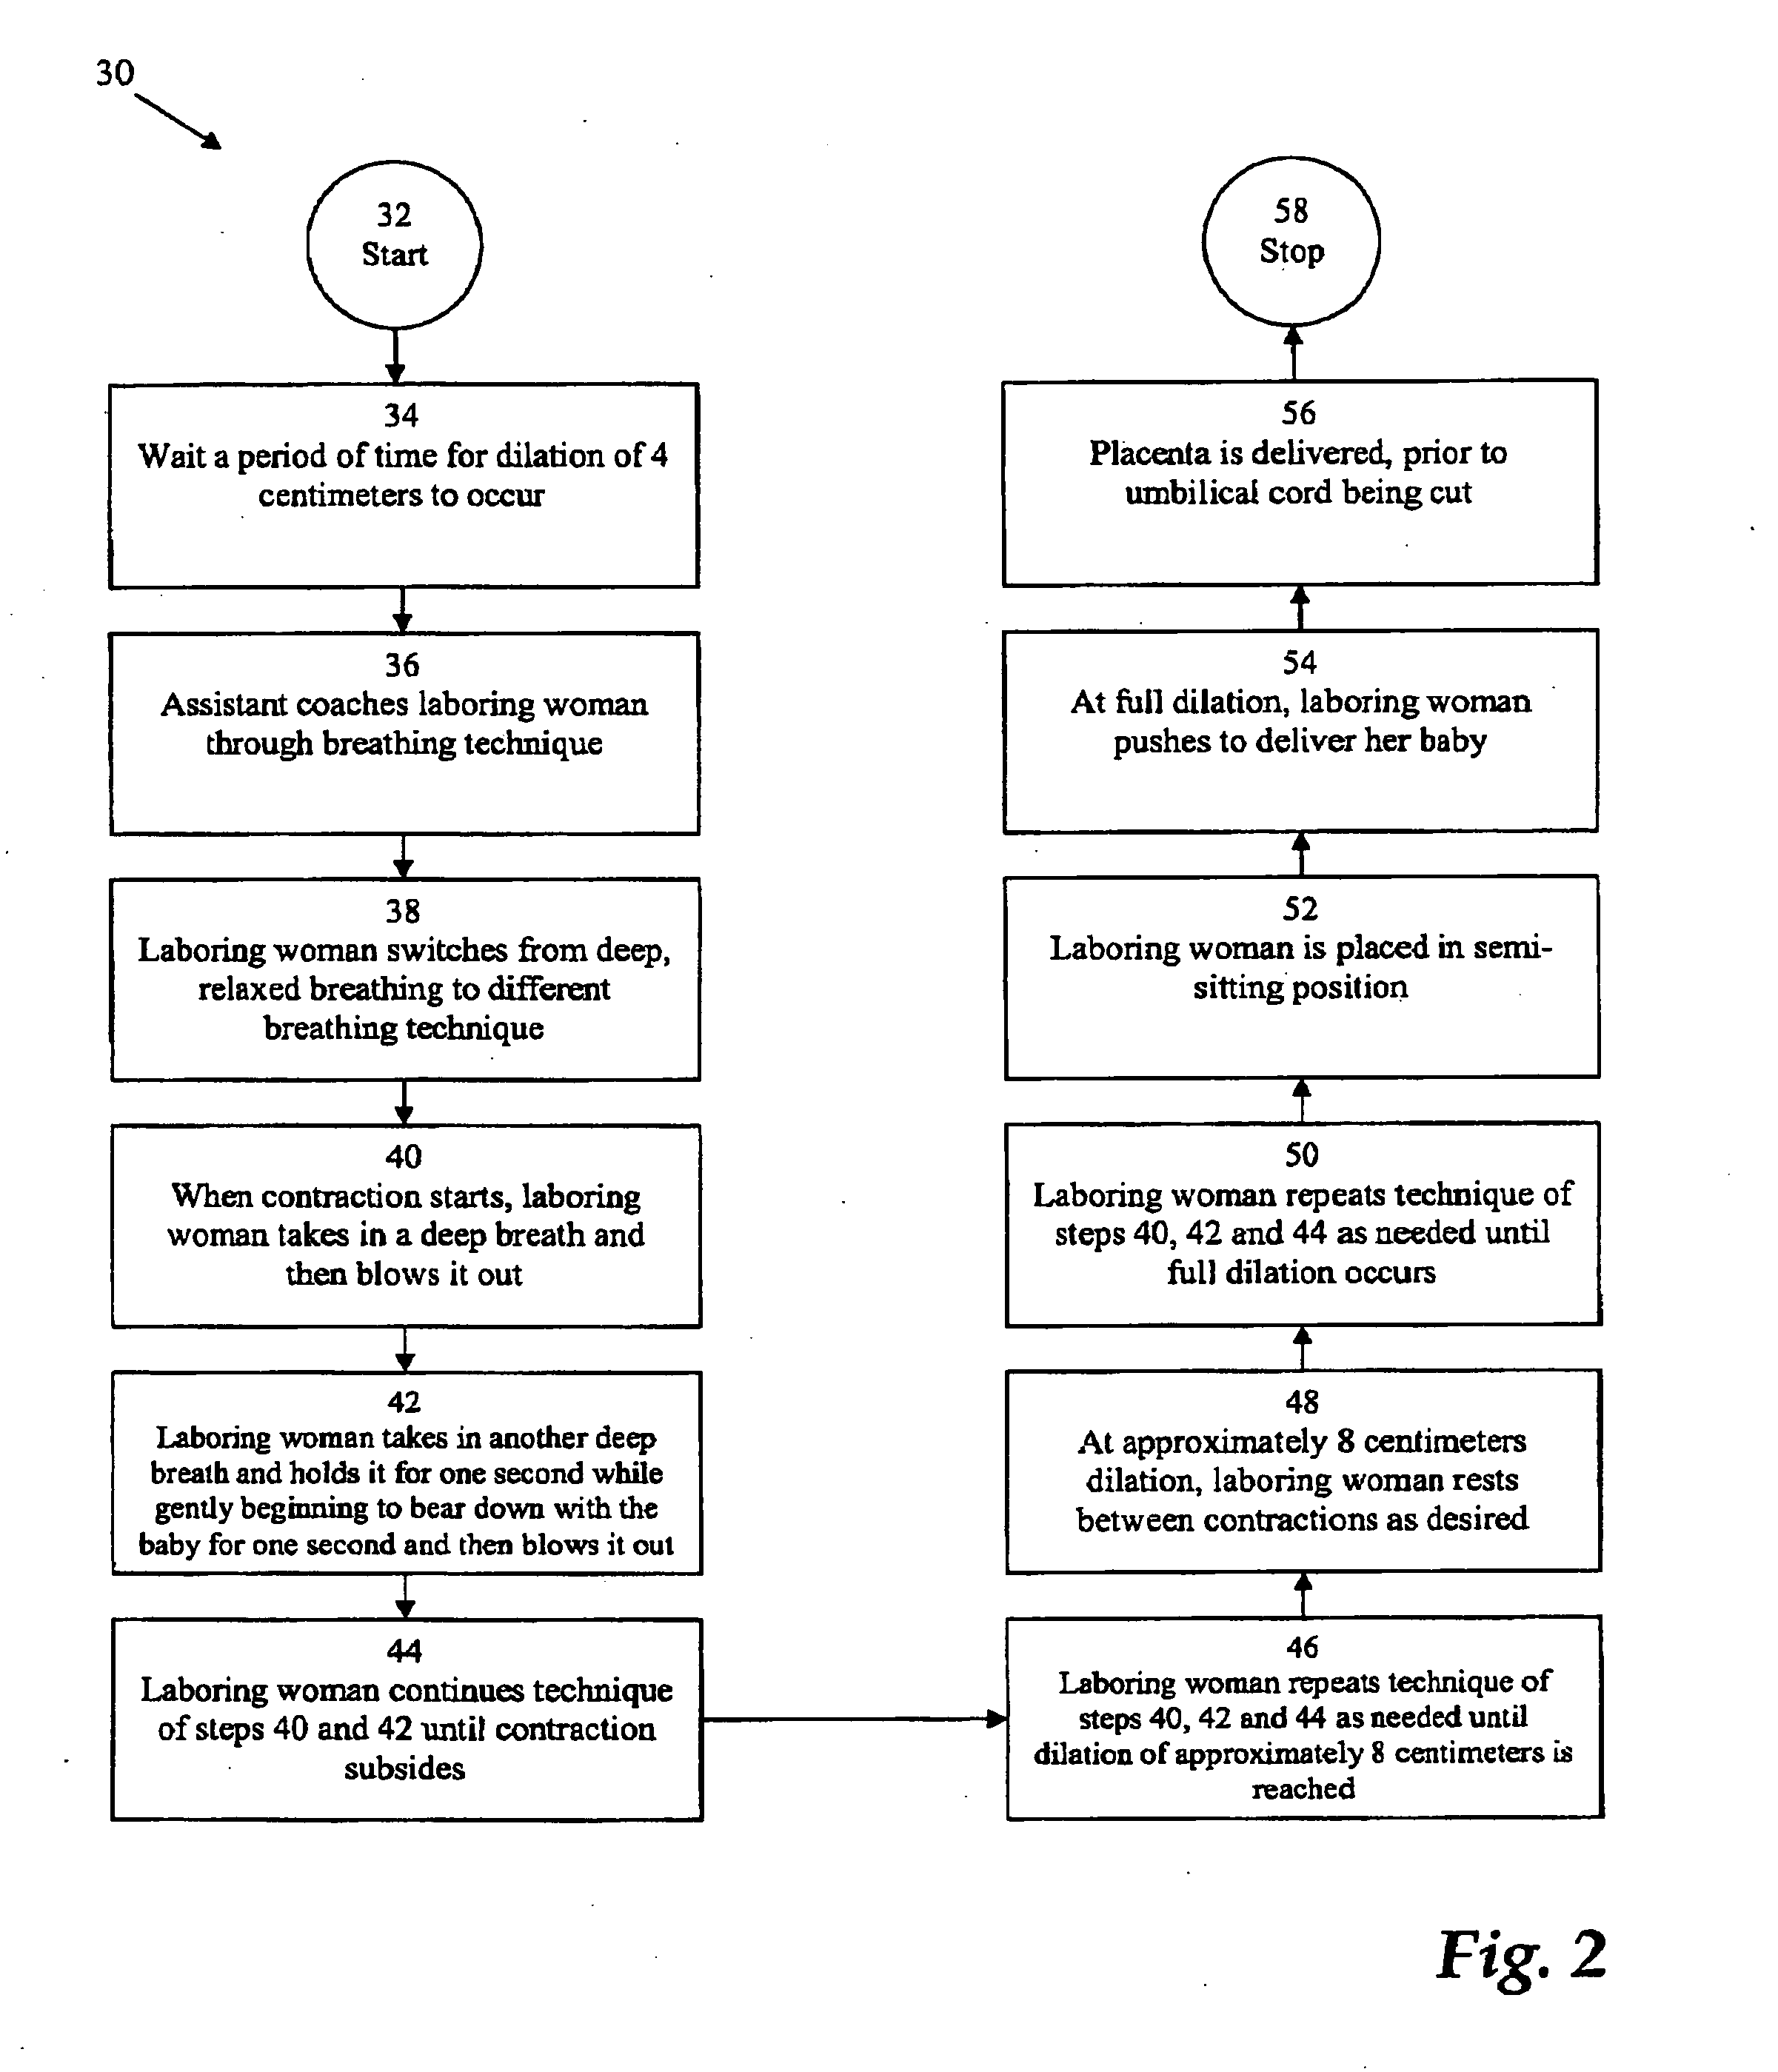 Method for managing labor and childbirth